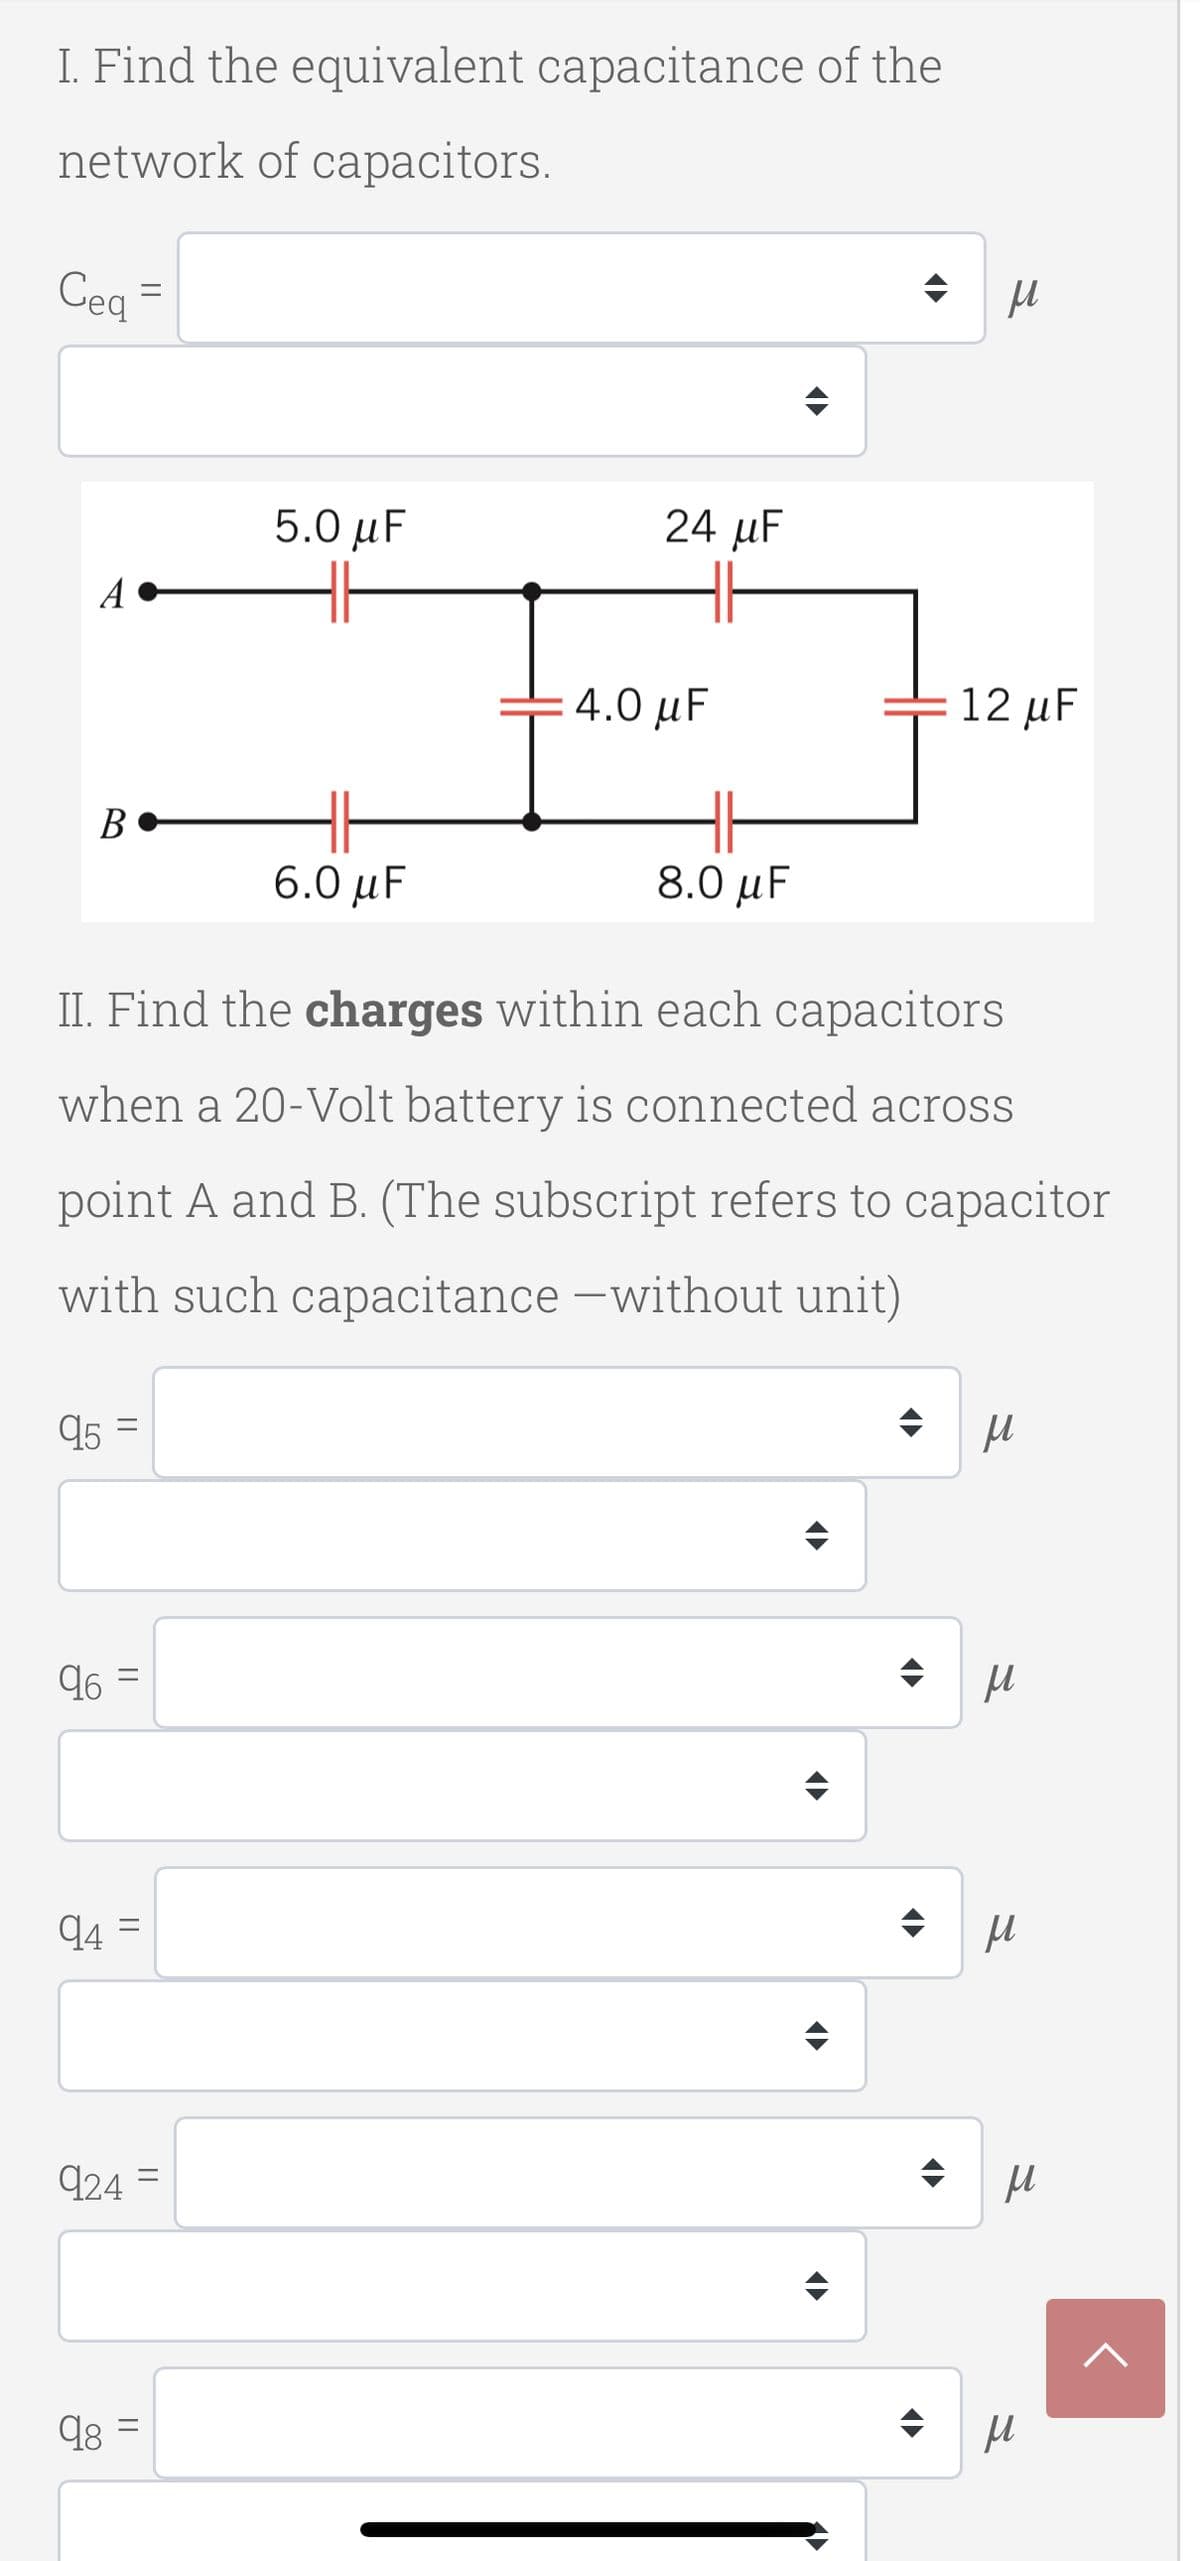 I. Find the equivalent capacitance of the
network of capacitors.
Ceq
5.0 μF
24 µF
A
4.0 μ
12 µF
В
6.0 μF
8.0 μ
II. Find the charges within each capacitors
when a 20-Volt battery is connected across
point A and B. (The subscript refers to capacitor
with such capacitance -without unit)
95 =
96 =
94 =
924 =
||
